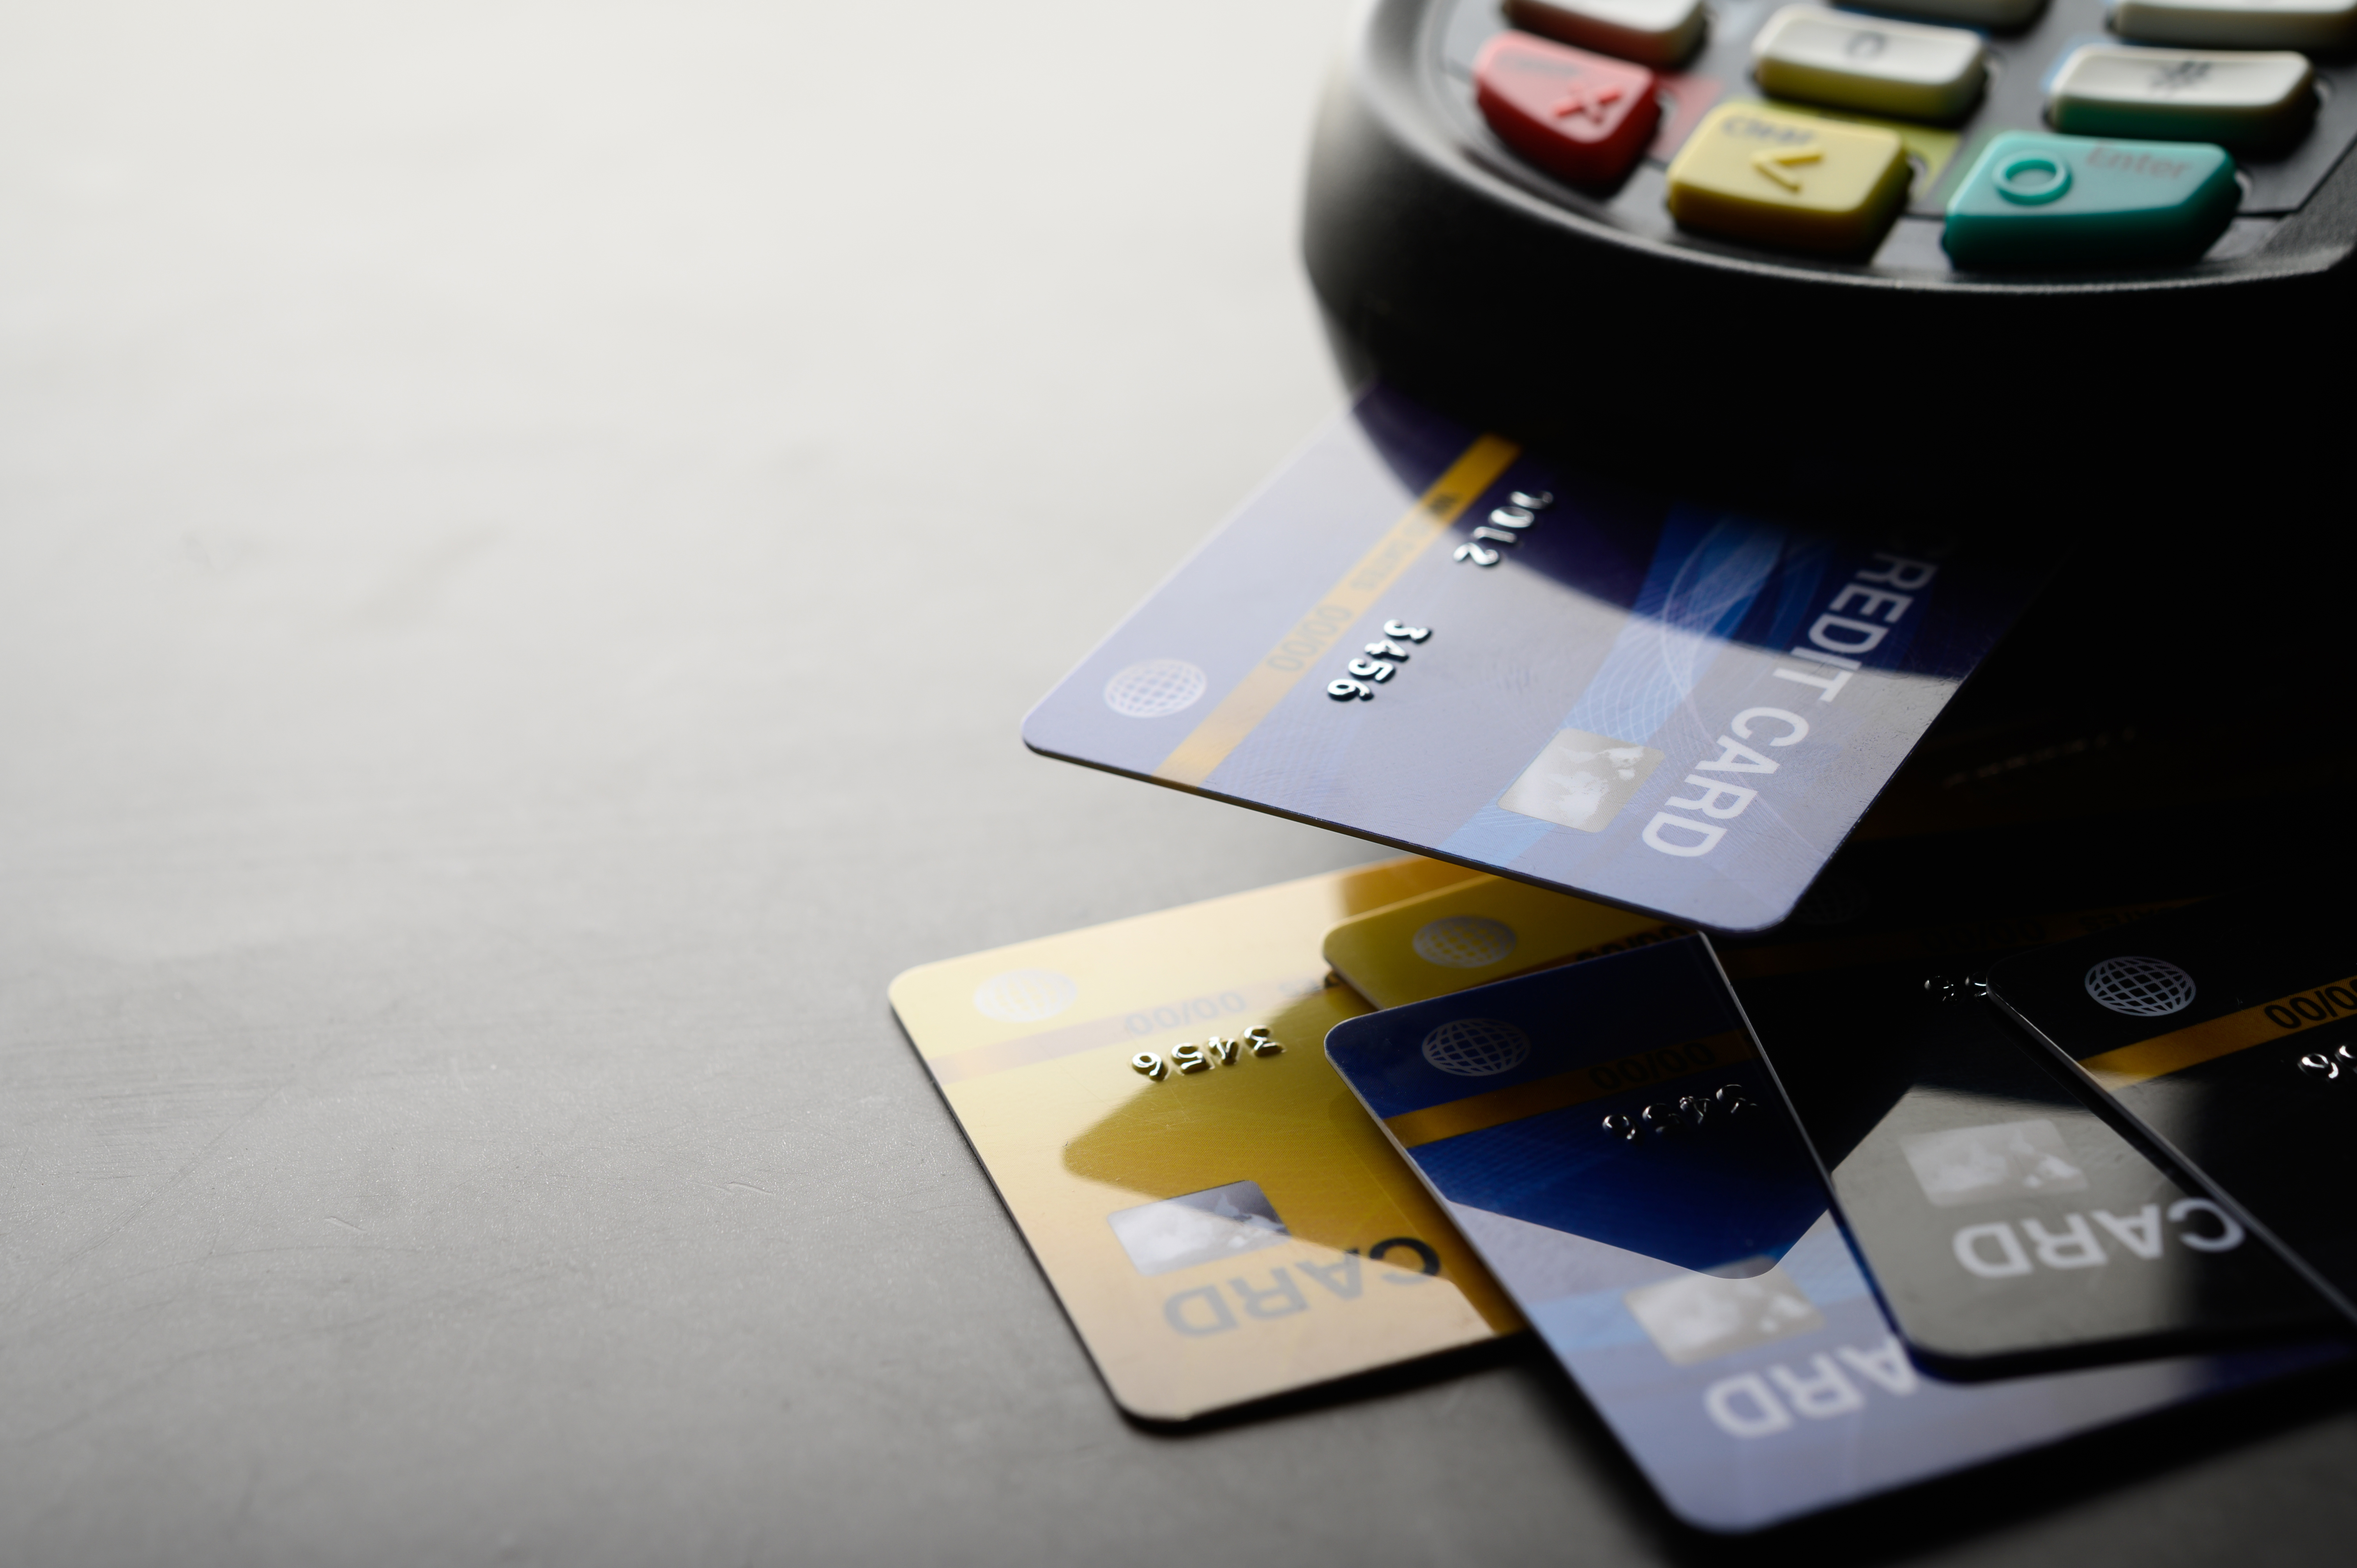 Prepaid debit cards compete with savings accounts by offering higher interest rate